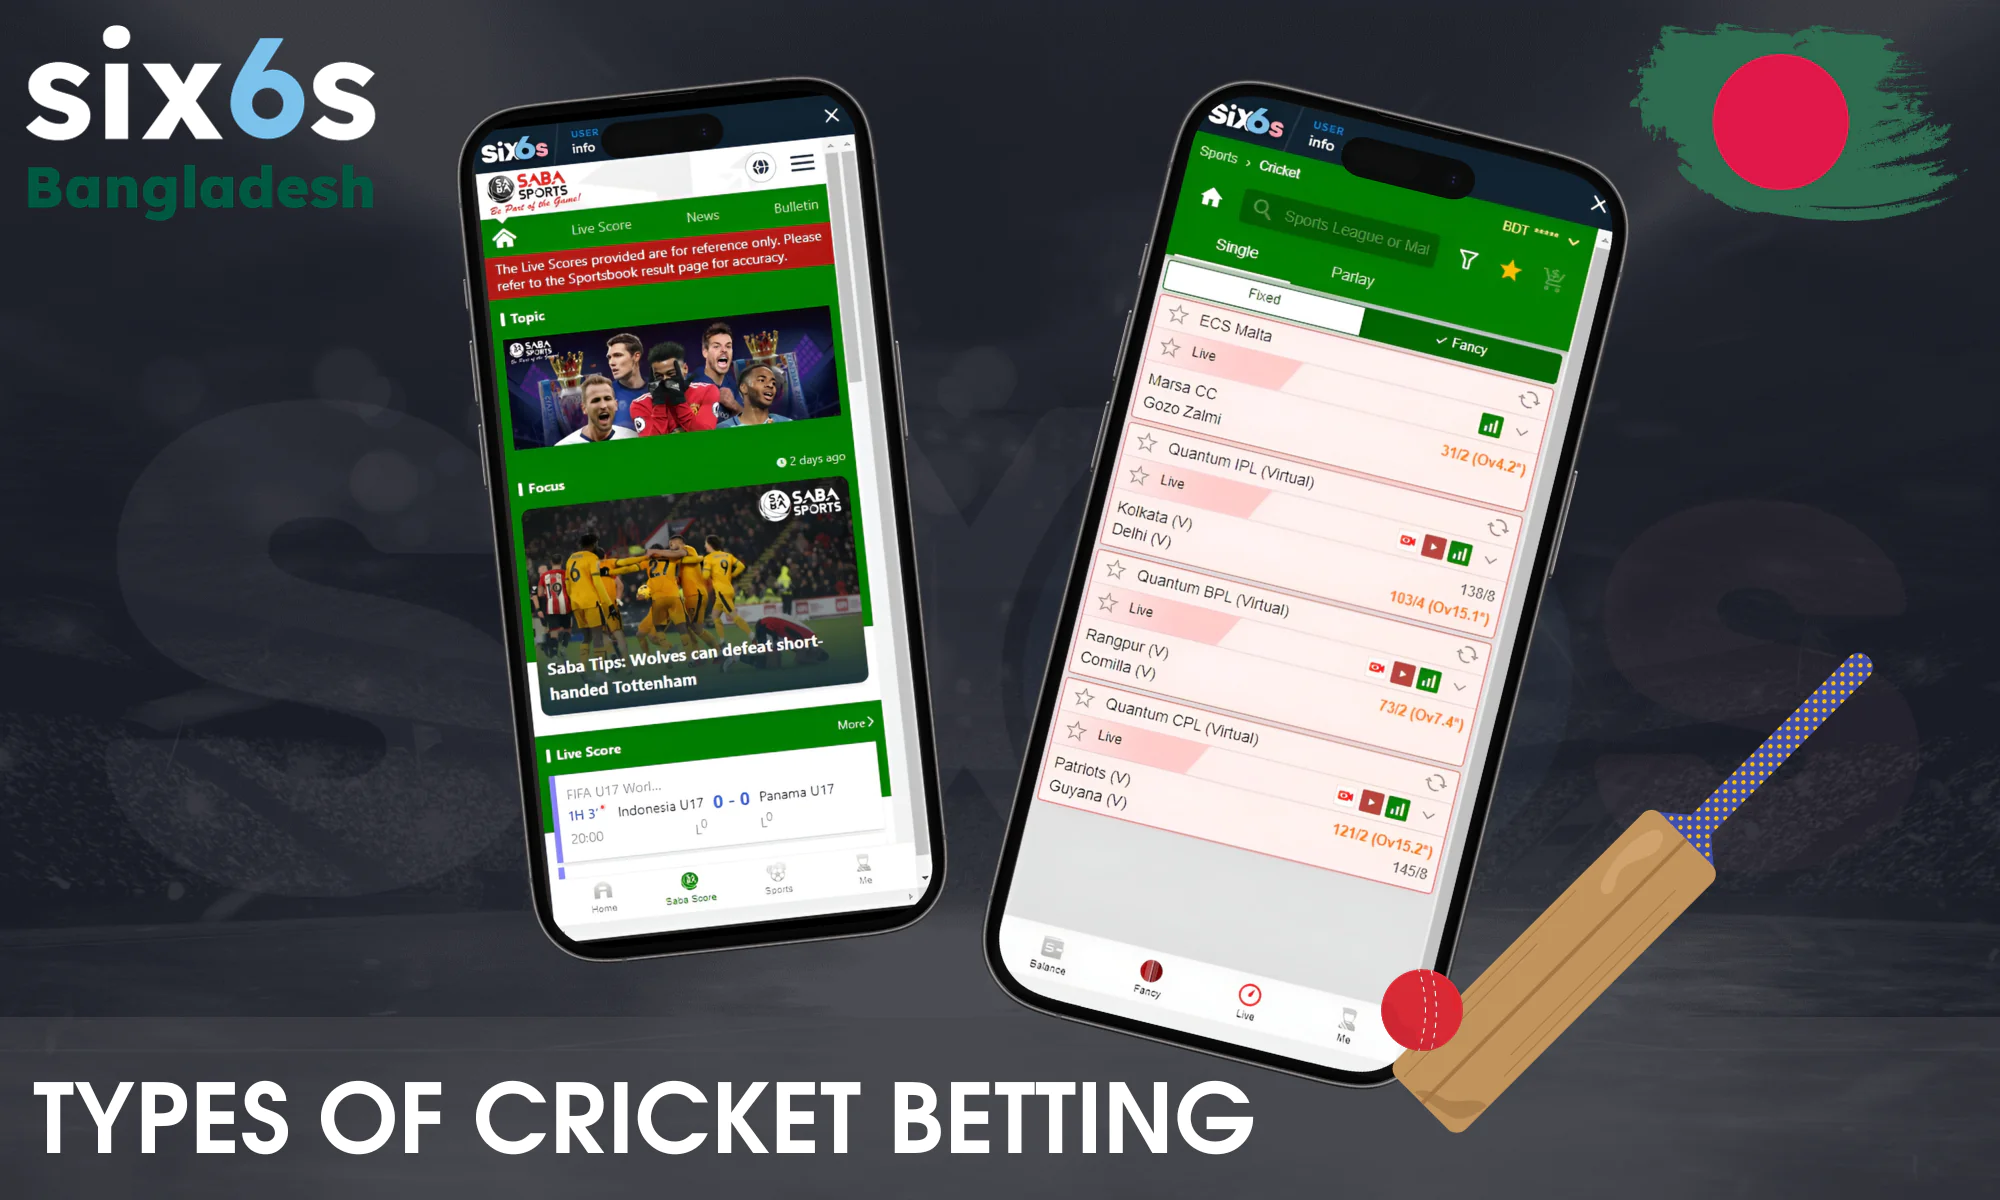 There are 2 types of bets available for Six6s players from Bangladesh